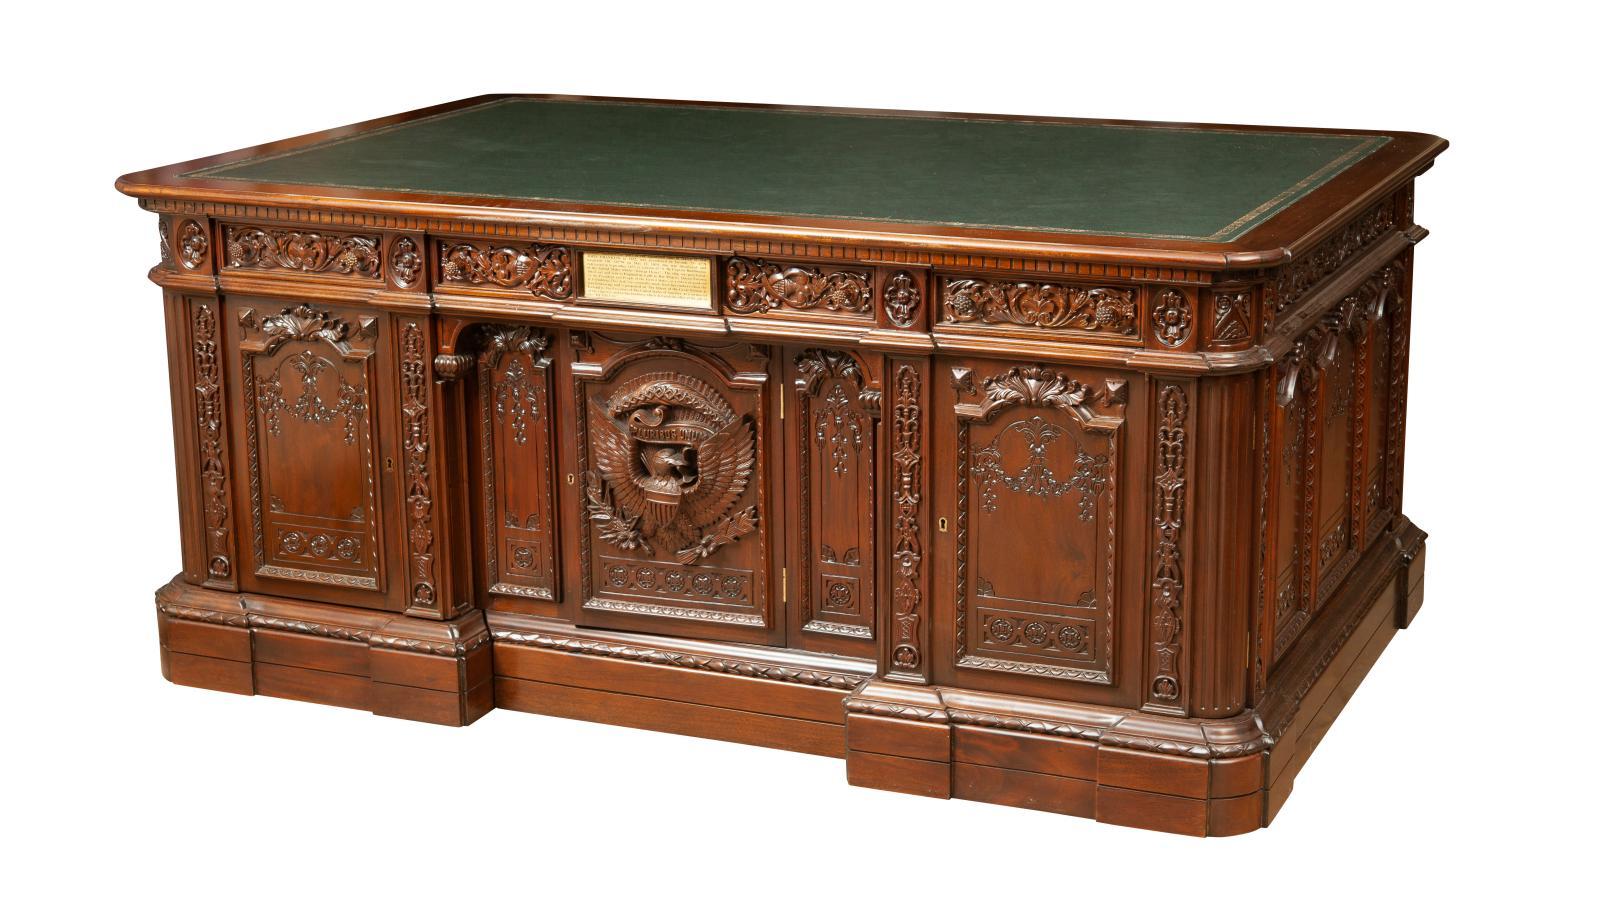 Replica of the desk of the President of the United States of America, known as the... An American Presidential Icon